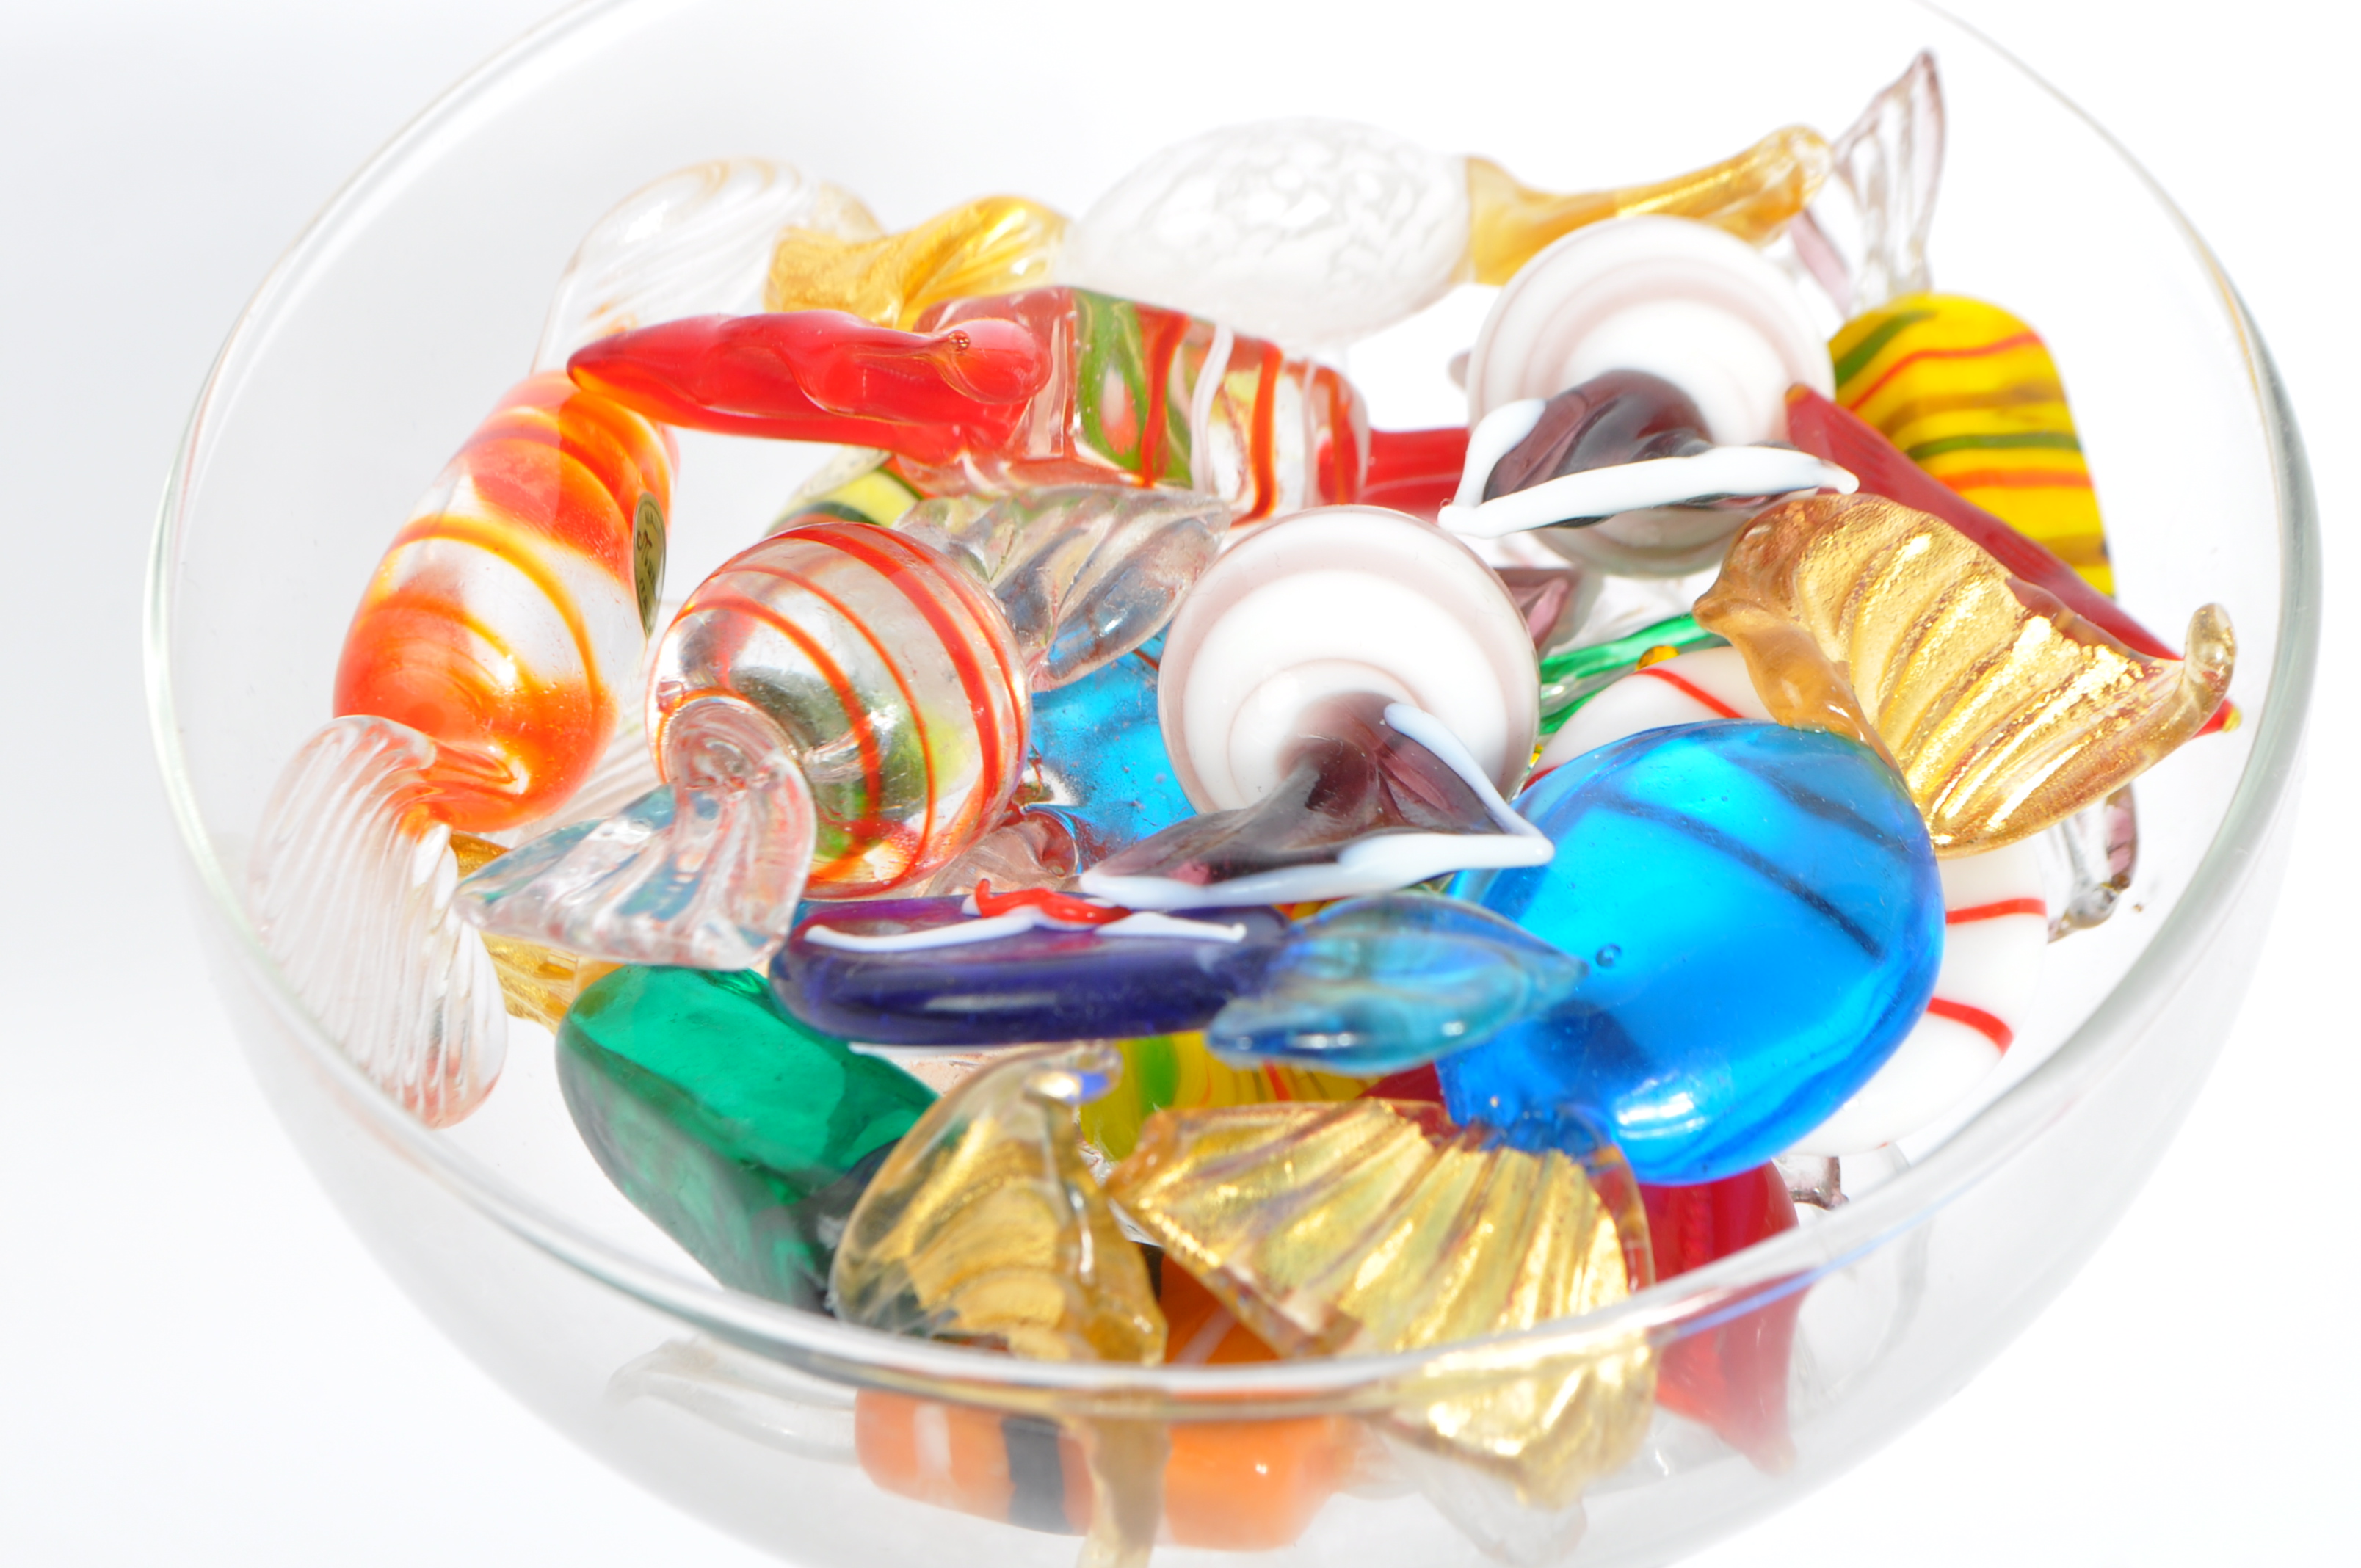 COLLECTION OF MID CENTURY MURANO GLASS SWEETS - Image 3 of 3